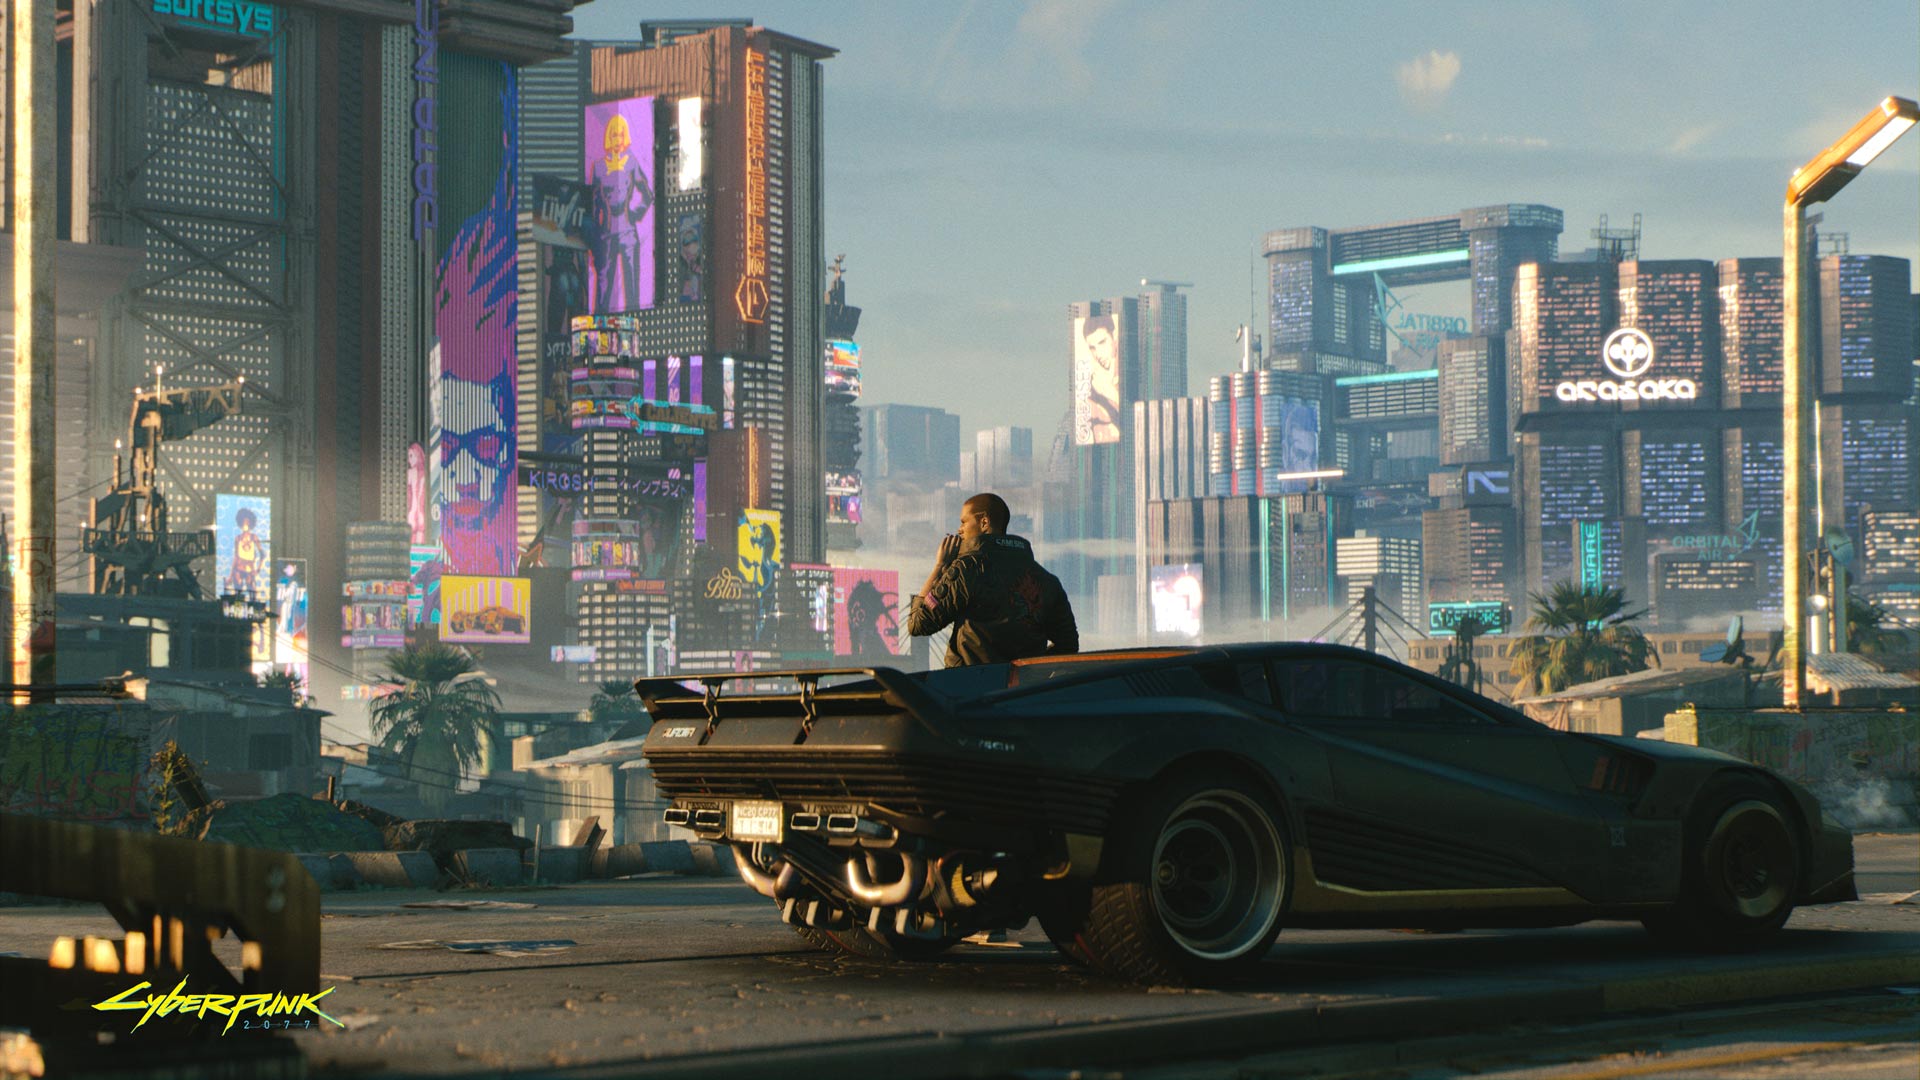 Cyberpunk 2077 From The Creators Of The Witcher 3 Wild Hunt